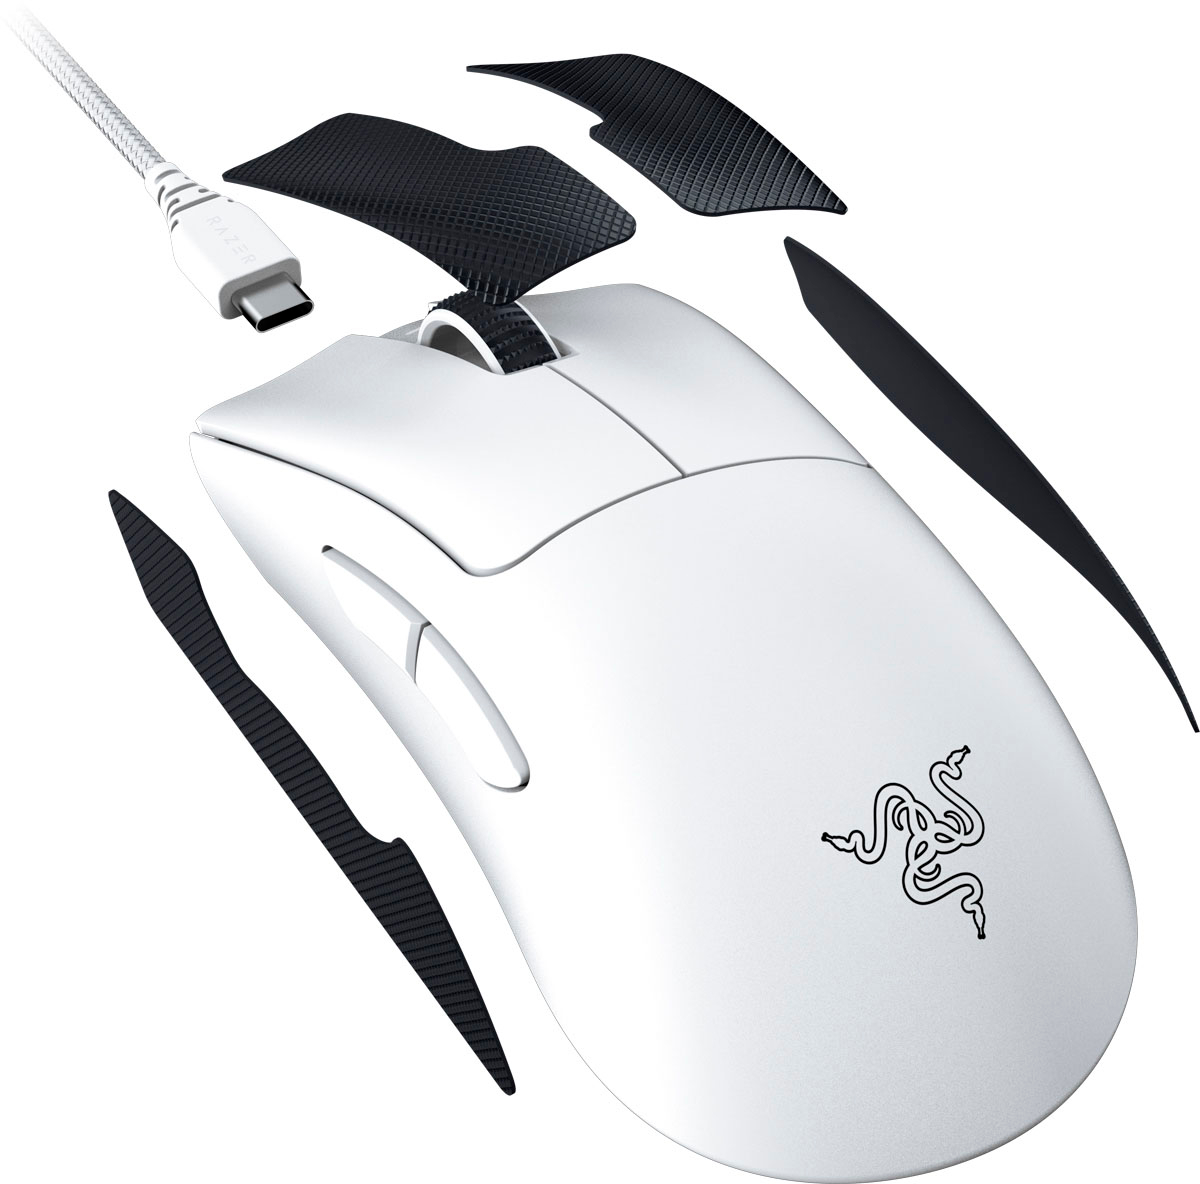 PC/タブレット PC周辺機器 Razer DeathAdder V3 Pro Lightweight Wireless Optical Gaming Mouse with 90  Hour Battery White RZ01-04630200-R3U1 - Best Buy